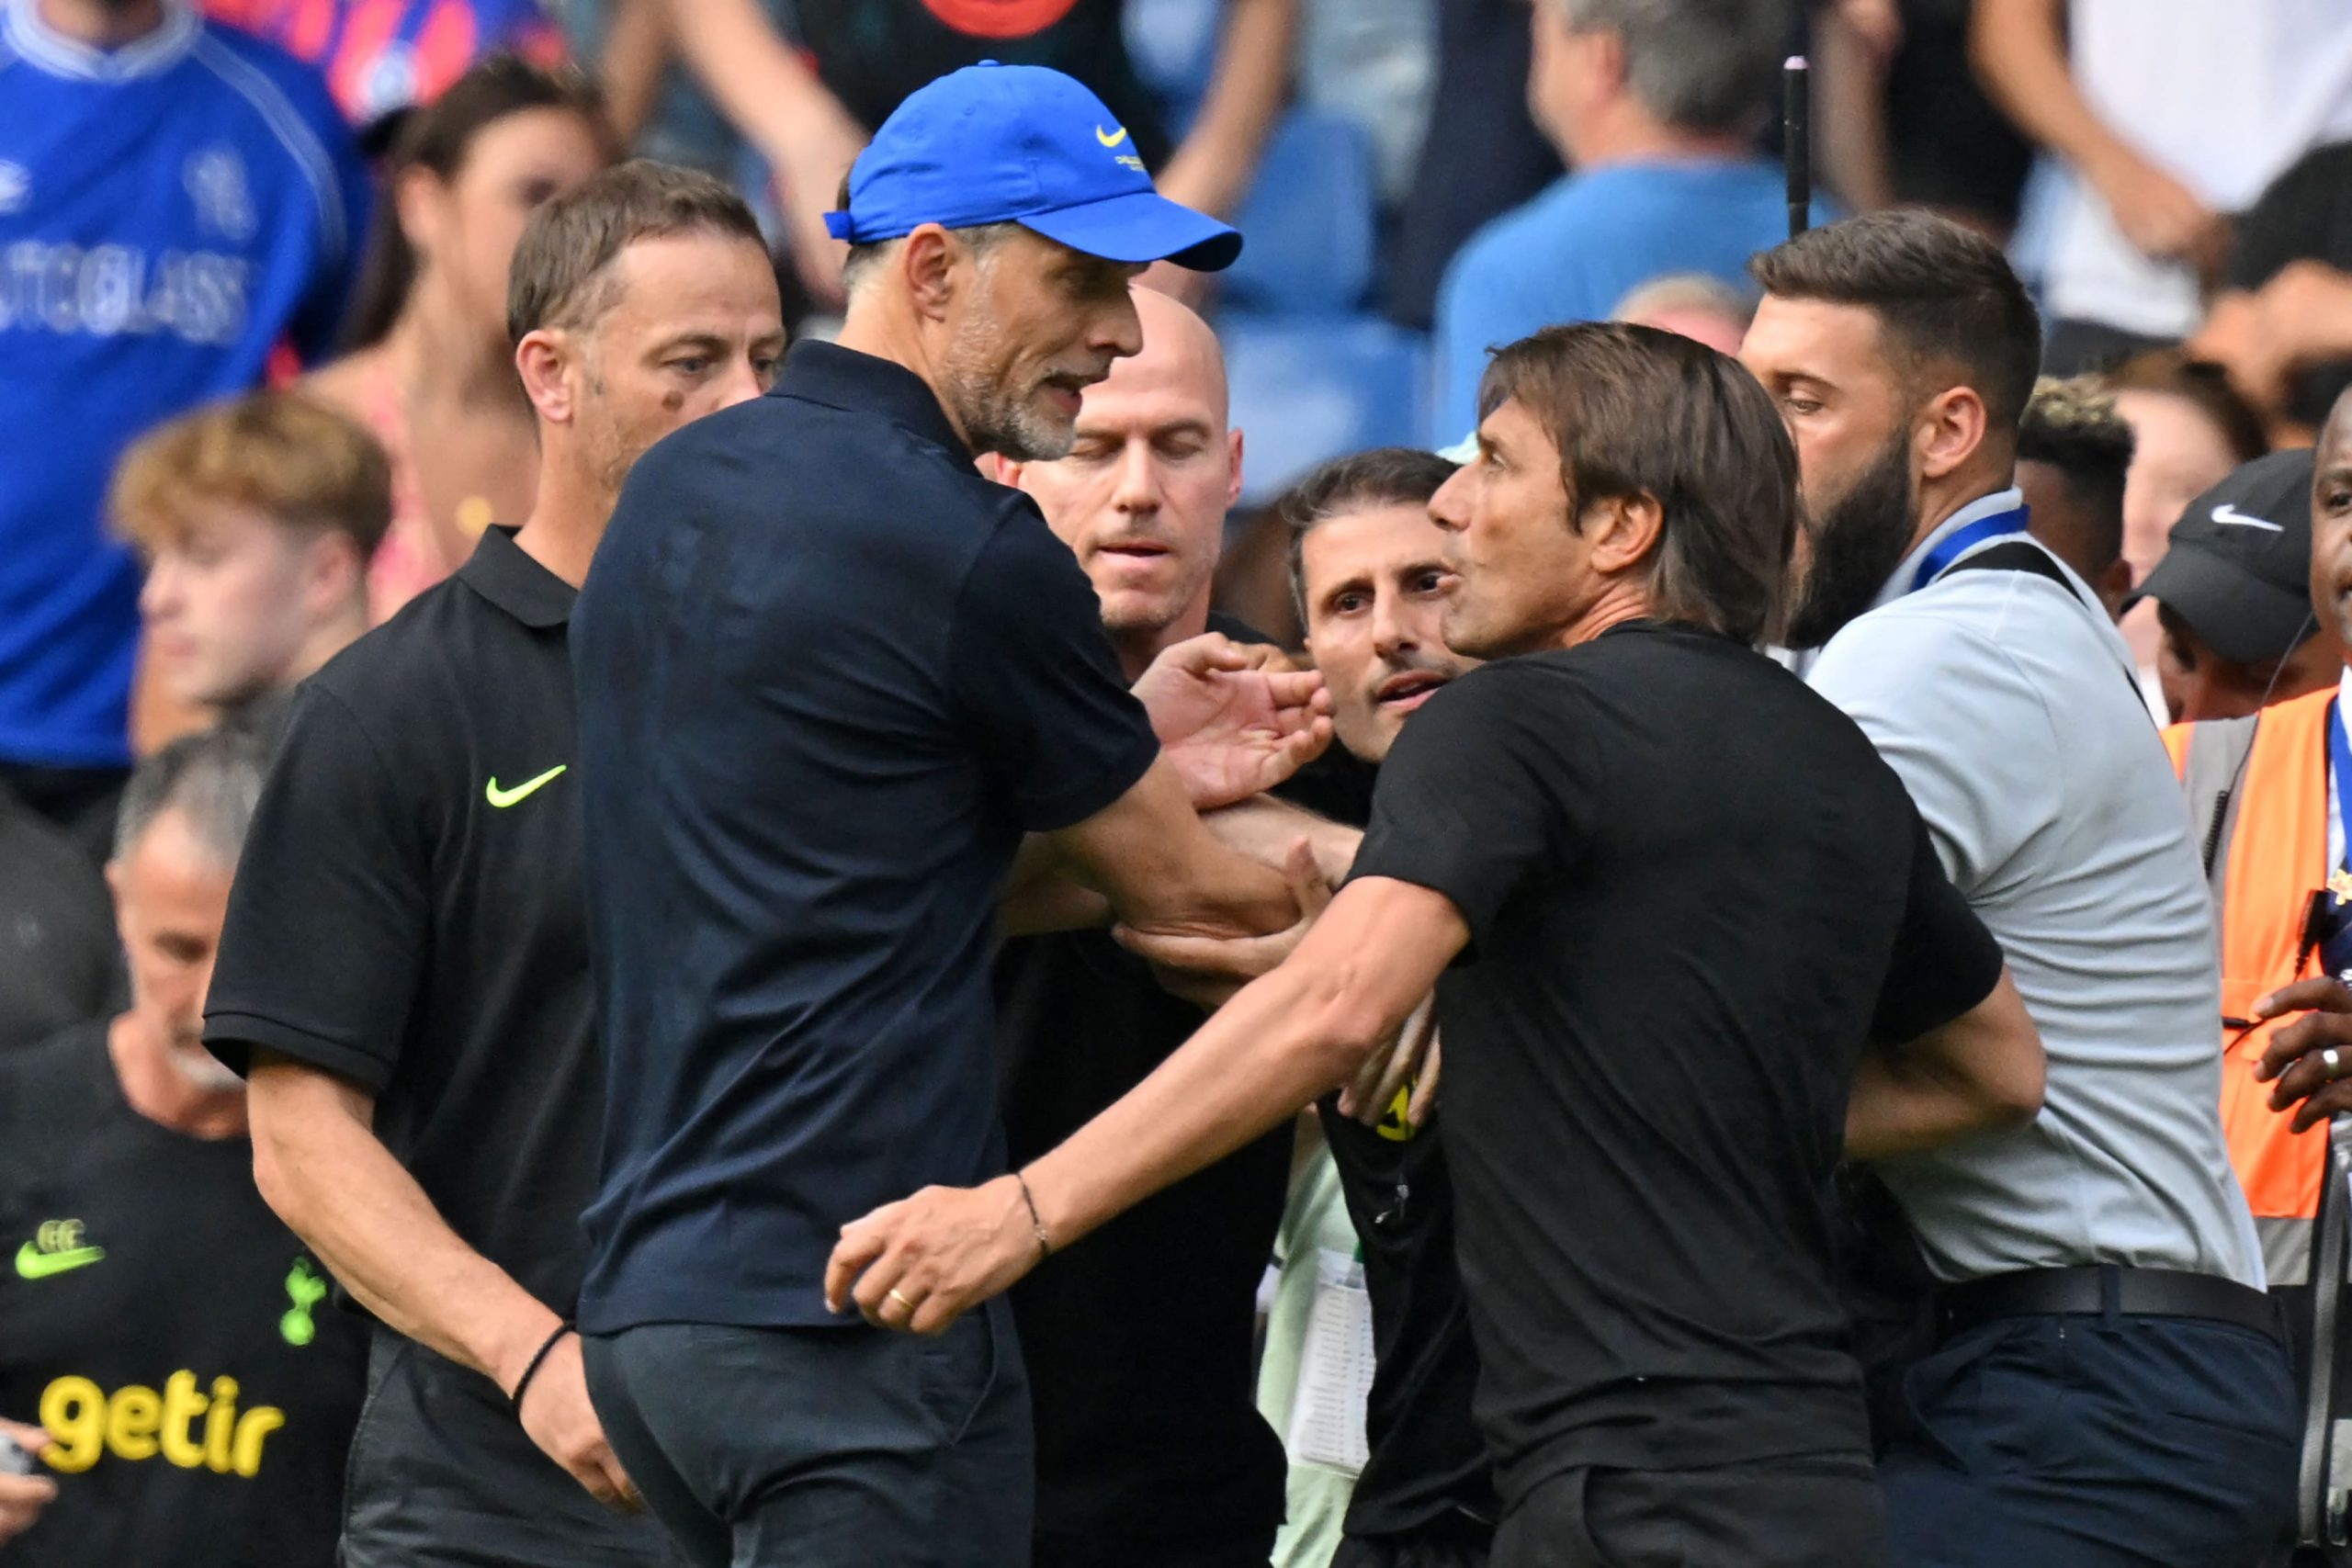 No ban for Tottenham Hotspur boss Antonio Conte after touchline tussle with Thomas Tuchel.